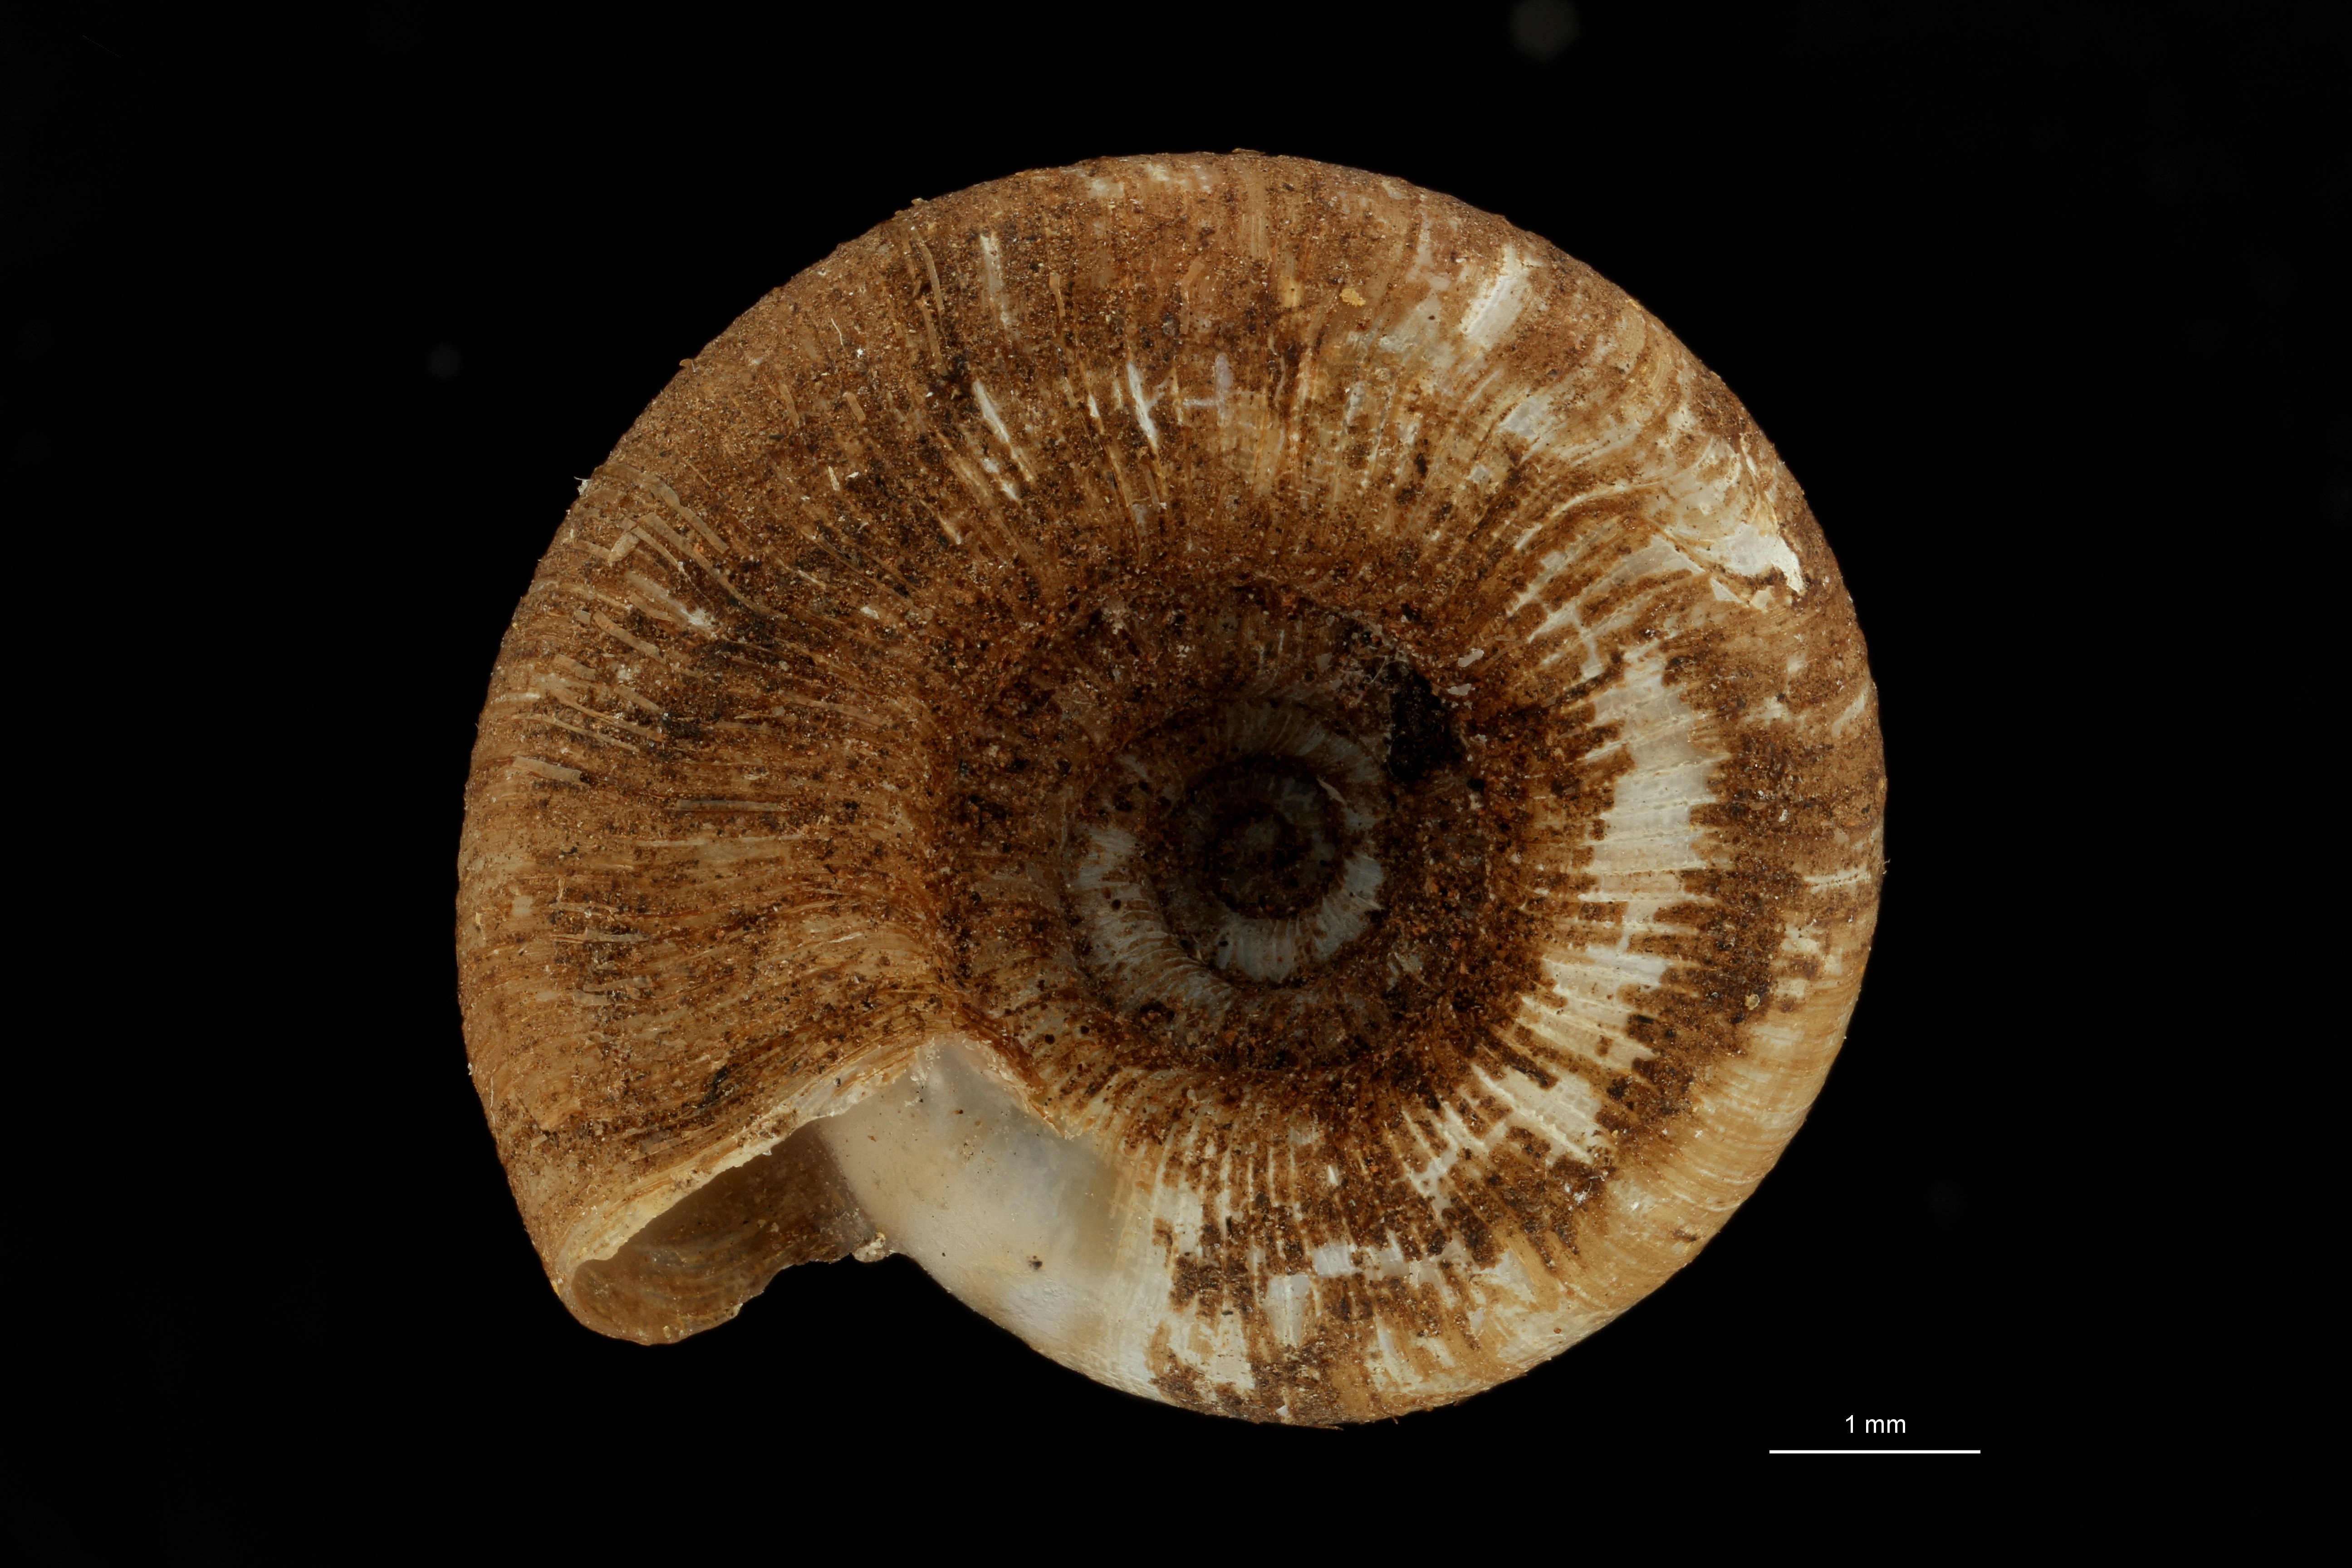 BE-RBINS-INV TYPE MT 685 Stephanoda latastei VENTRAL ZS PMax Scaled.jpg